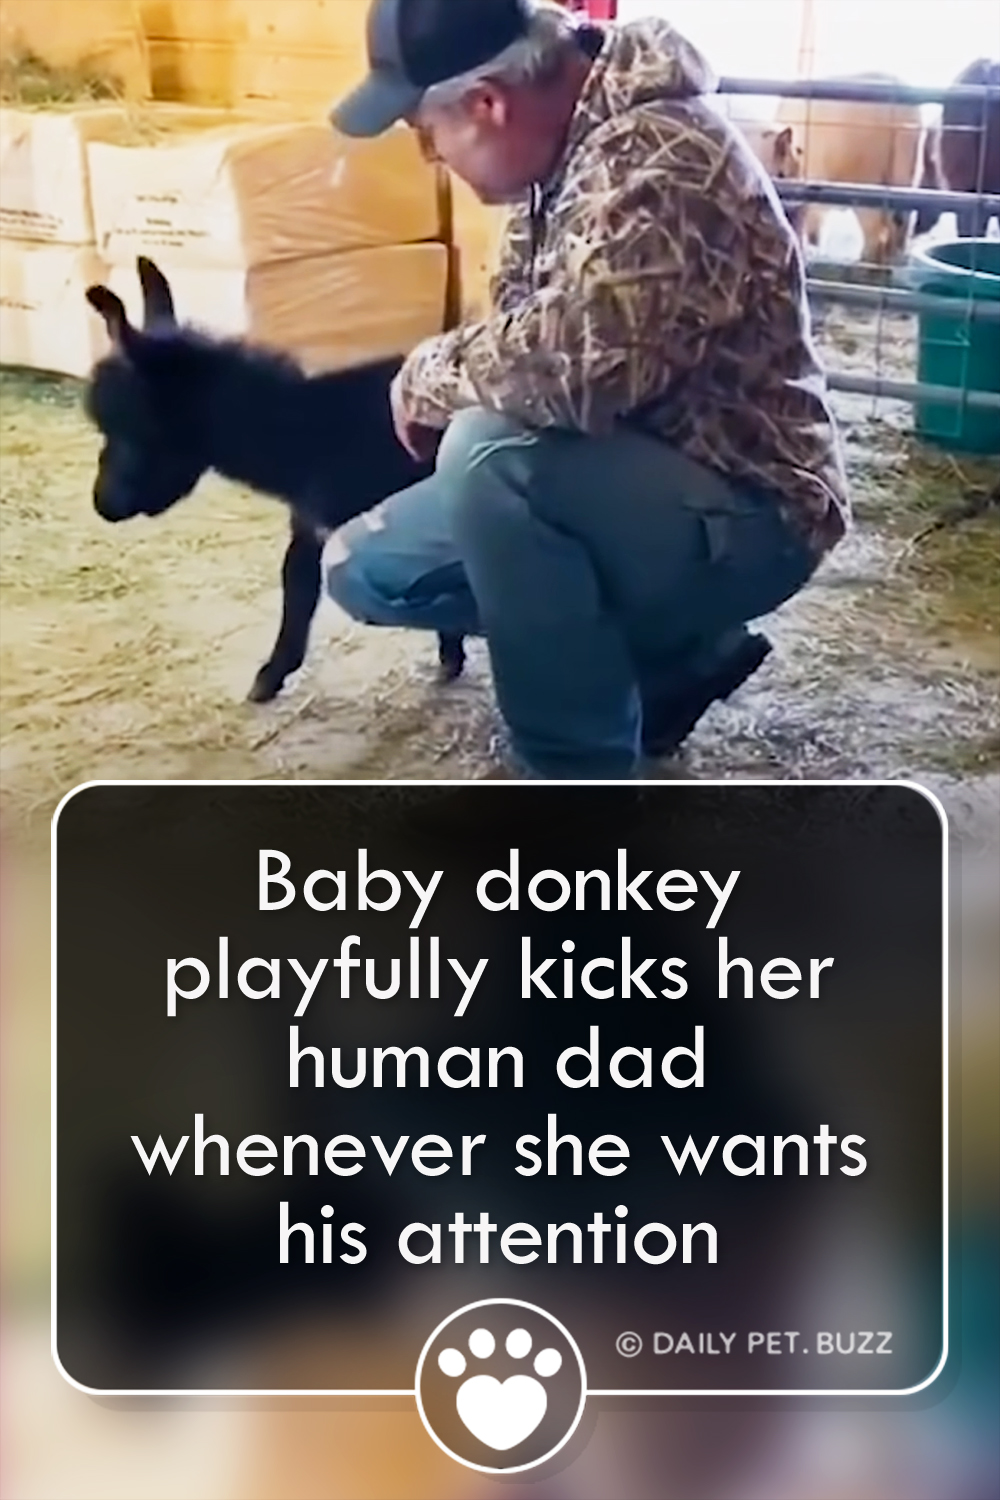 Baby donkey playfully kicks her human dad whenever she wants his attention